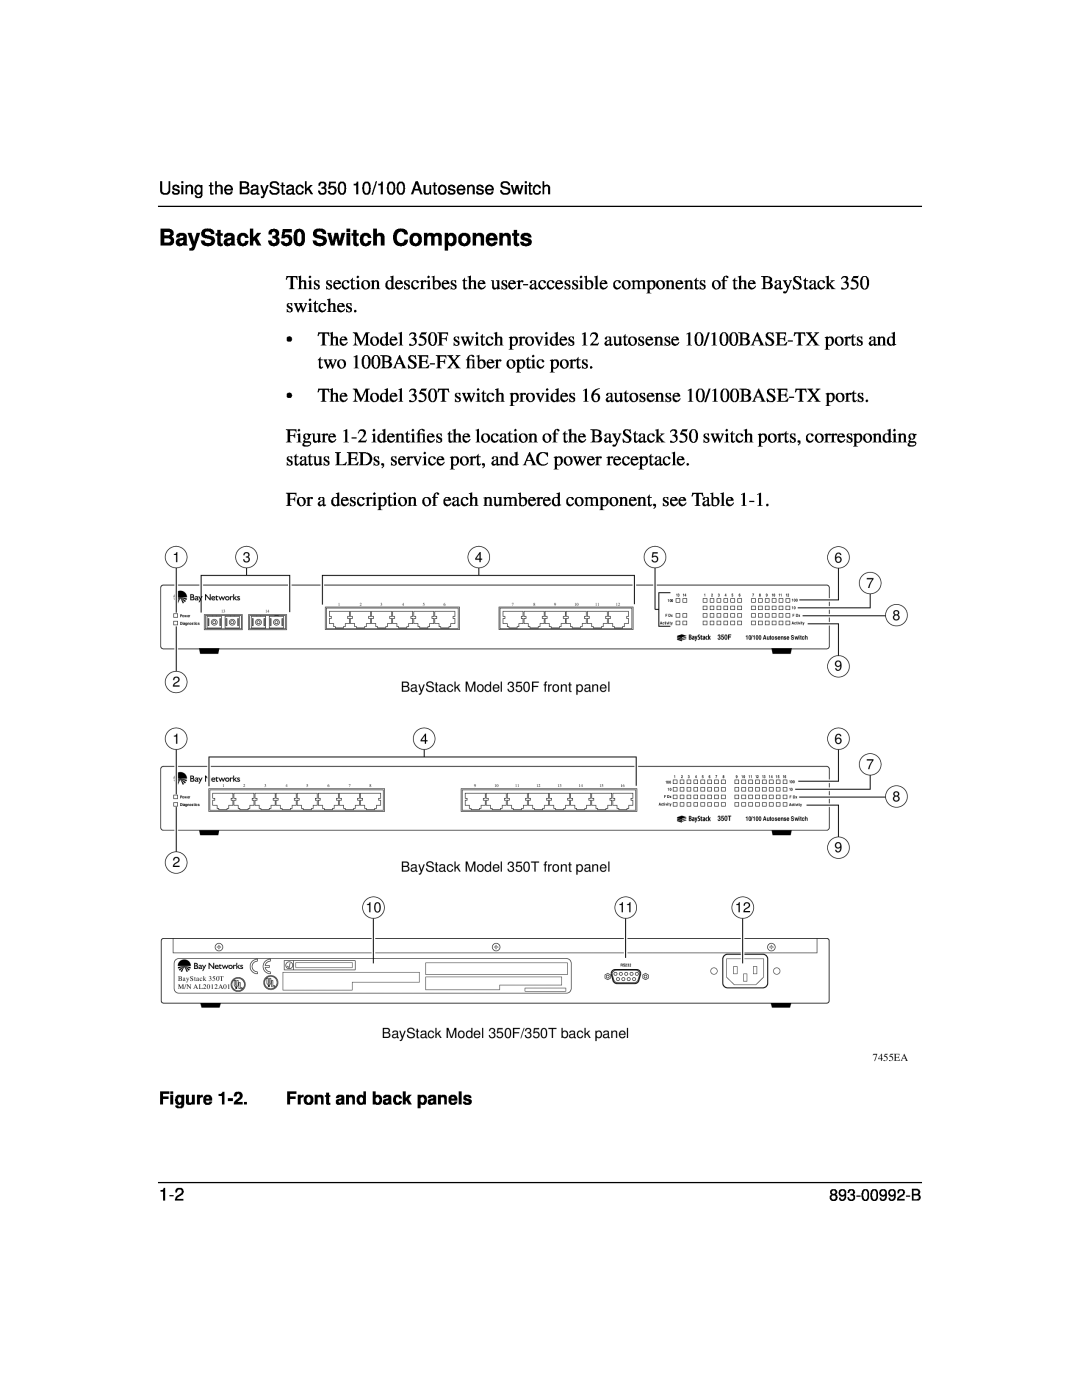 Bay Technical Associates manual BayStack 350 Switch Components 